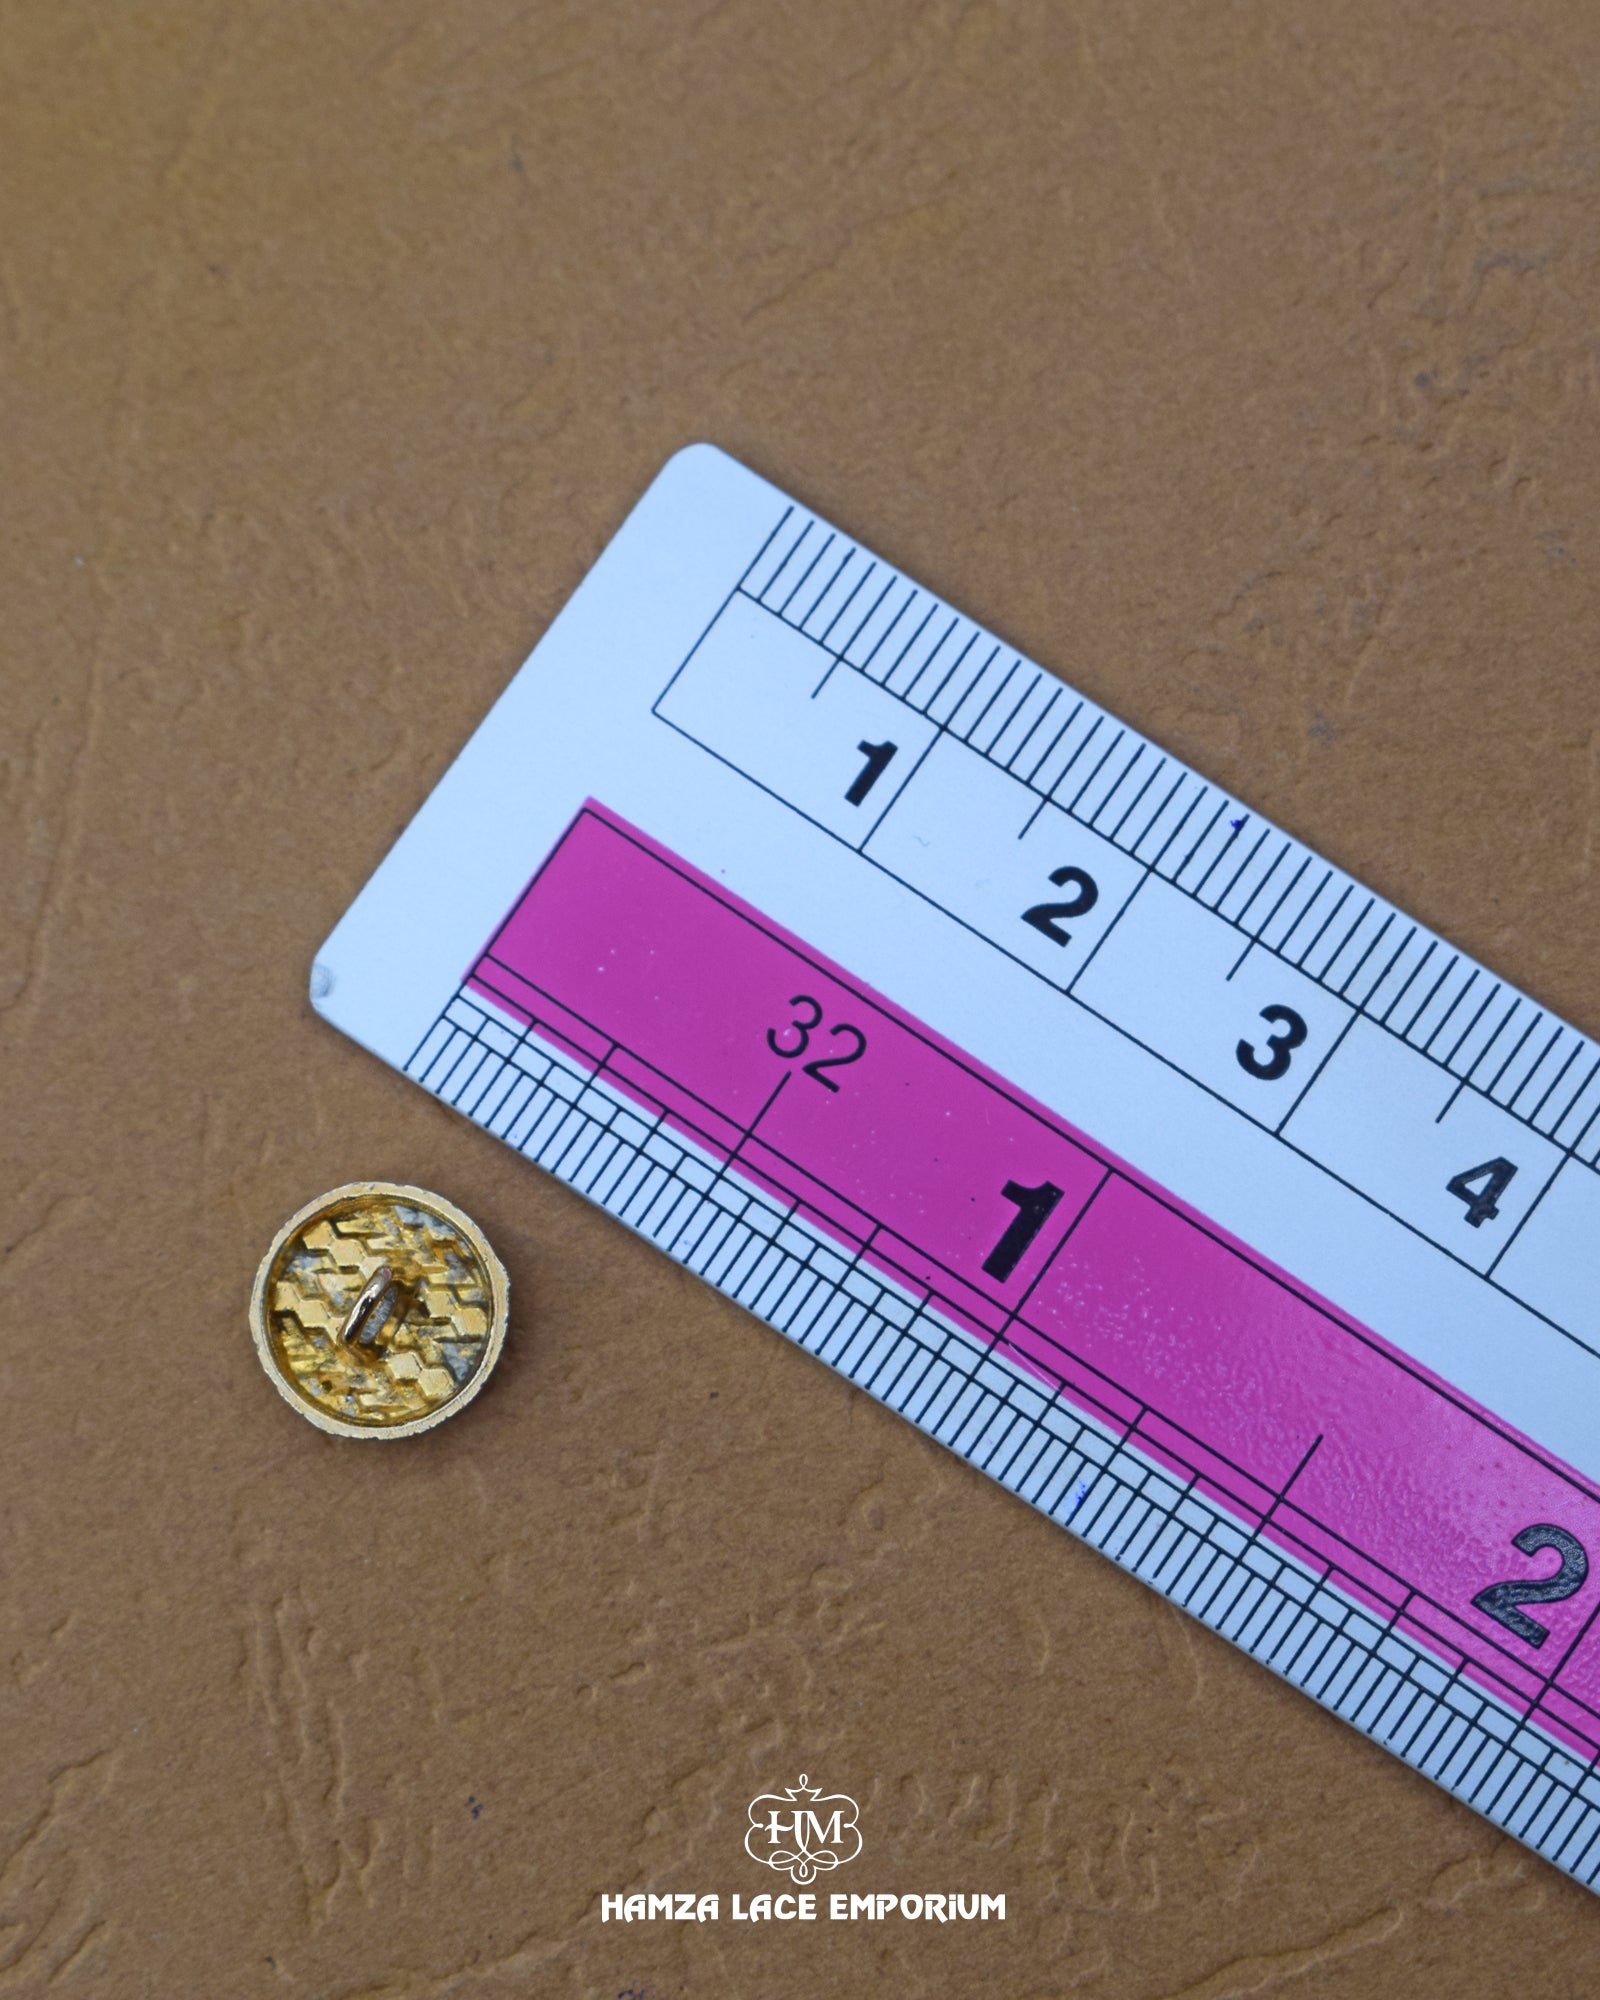 The size of the 'Dotted Metal Button MB696' is measured using a ruler.